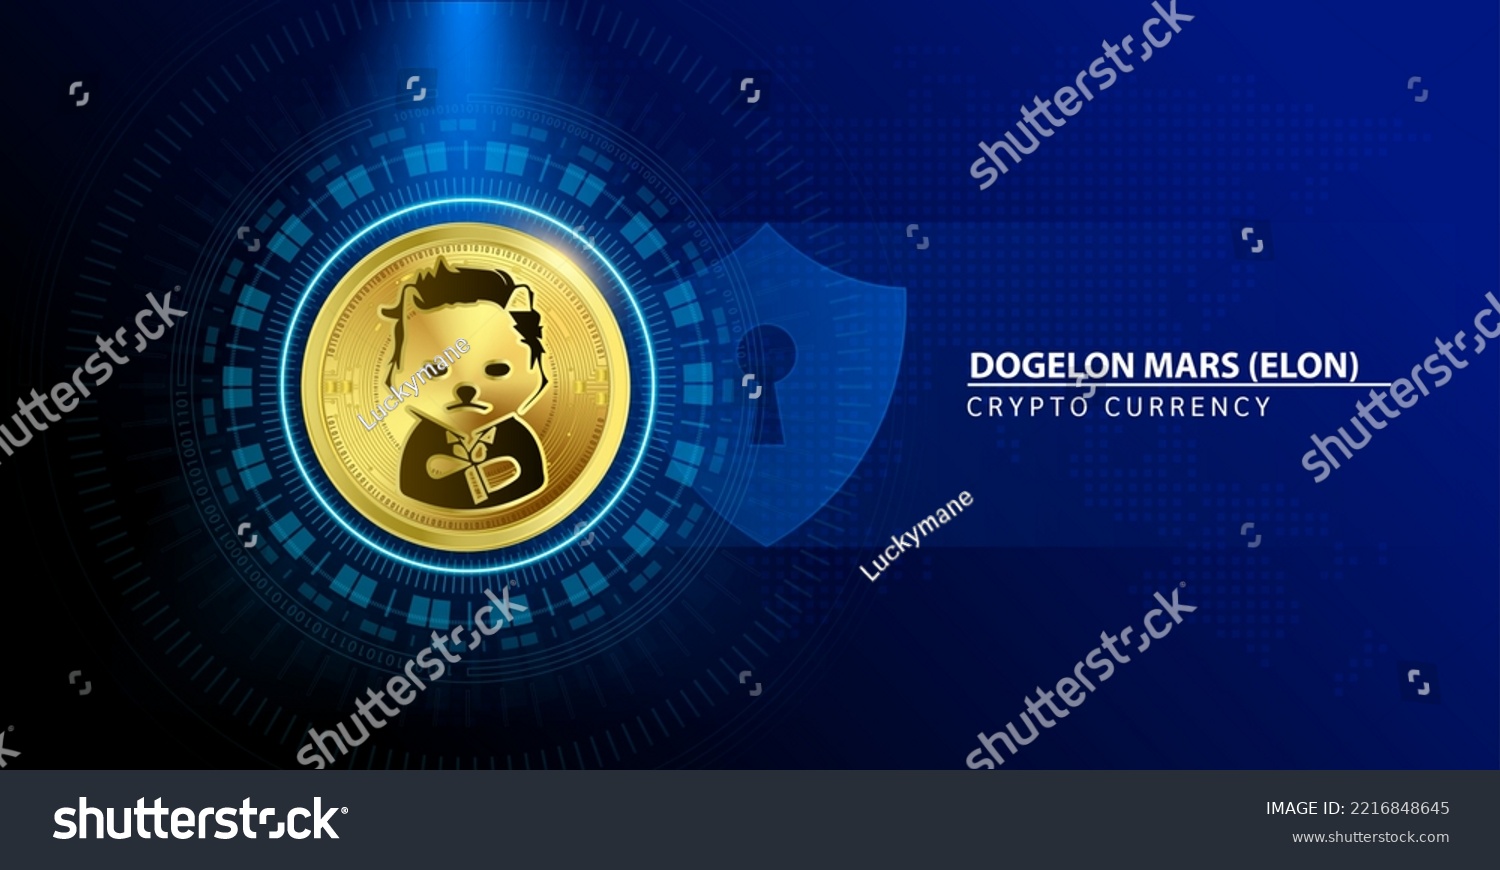 SVG of Dogelon Mars (ELON) coin gold  (crypto currency). Cryptocurrency blockchain. Future digital currency replacement technology concept. On blue background. 3D Vector illustration. svg